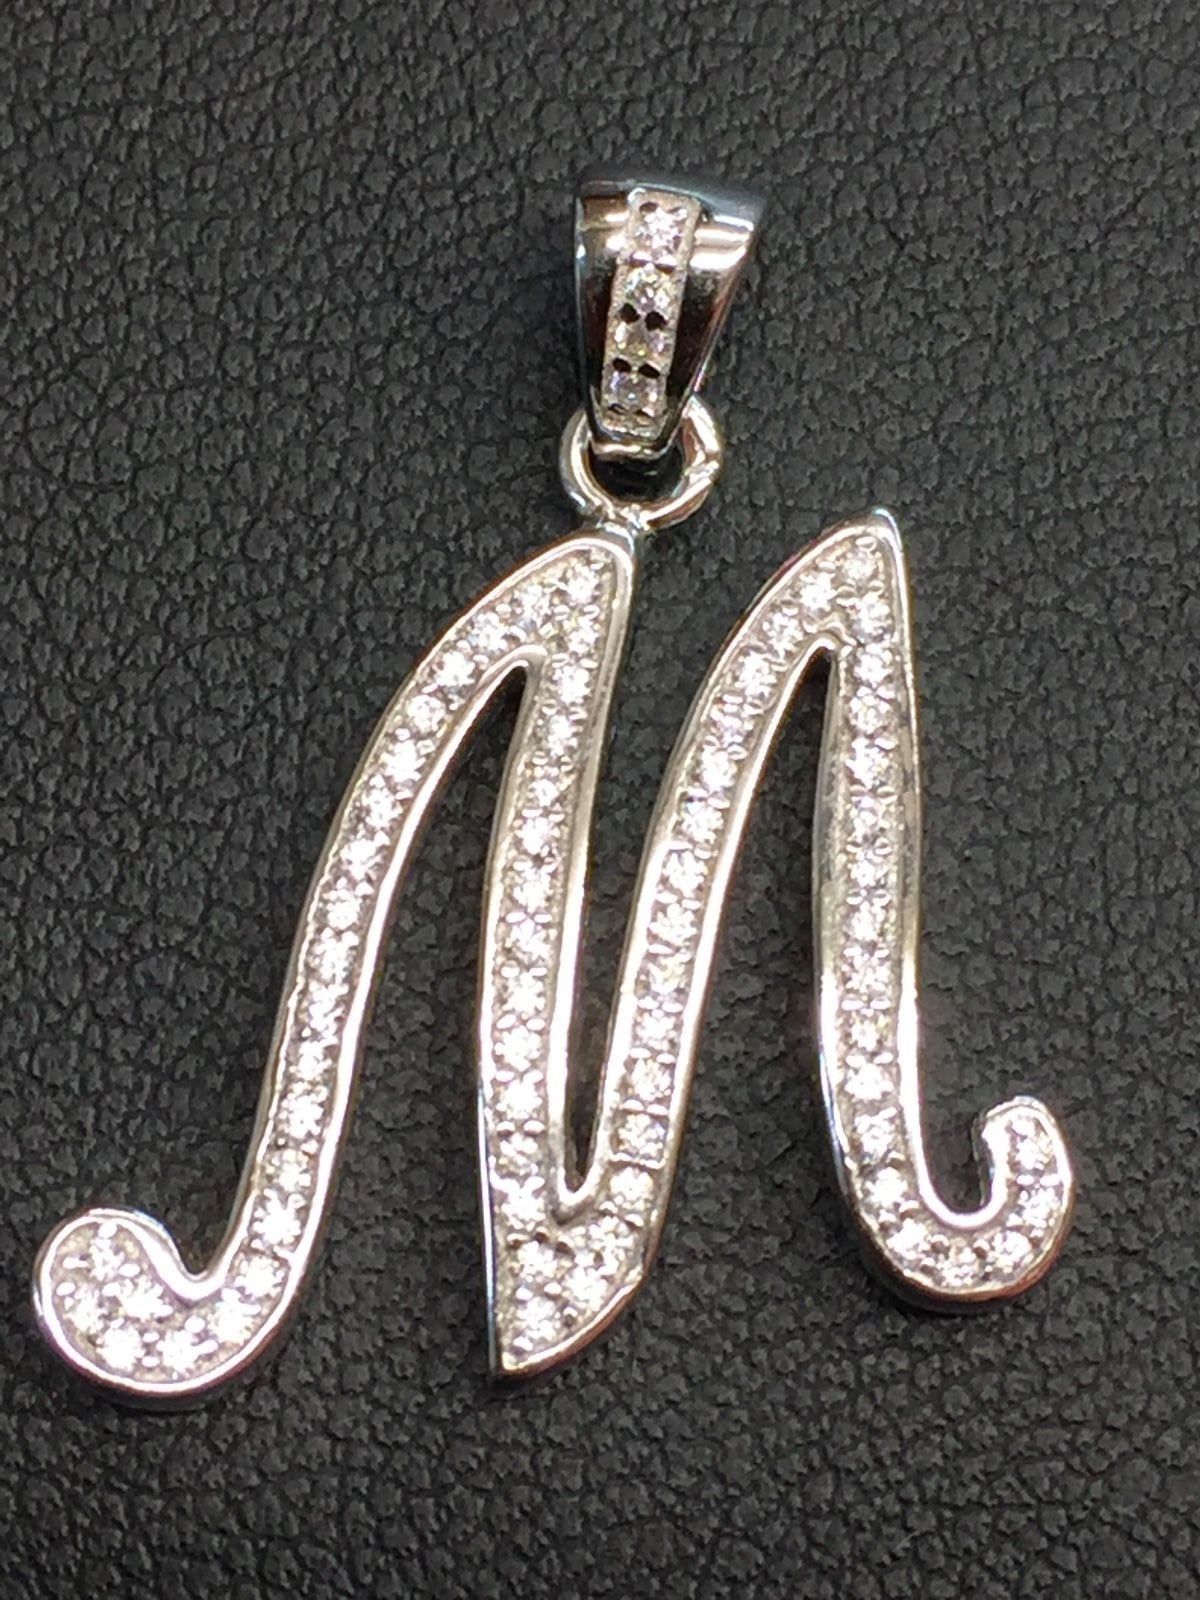 NEW!! 925 Sterling Silver CZ Letter Initial "M" Pendant Necklace - $21.99